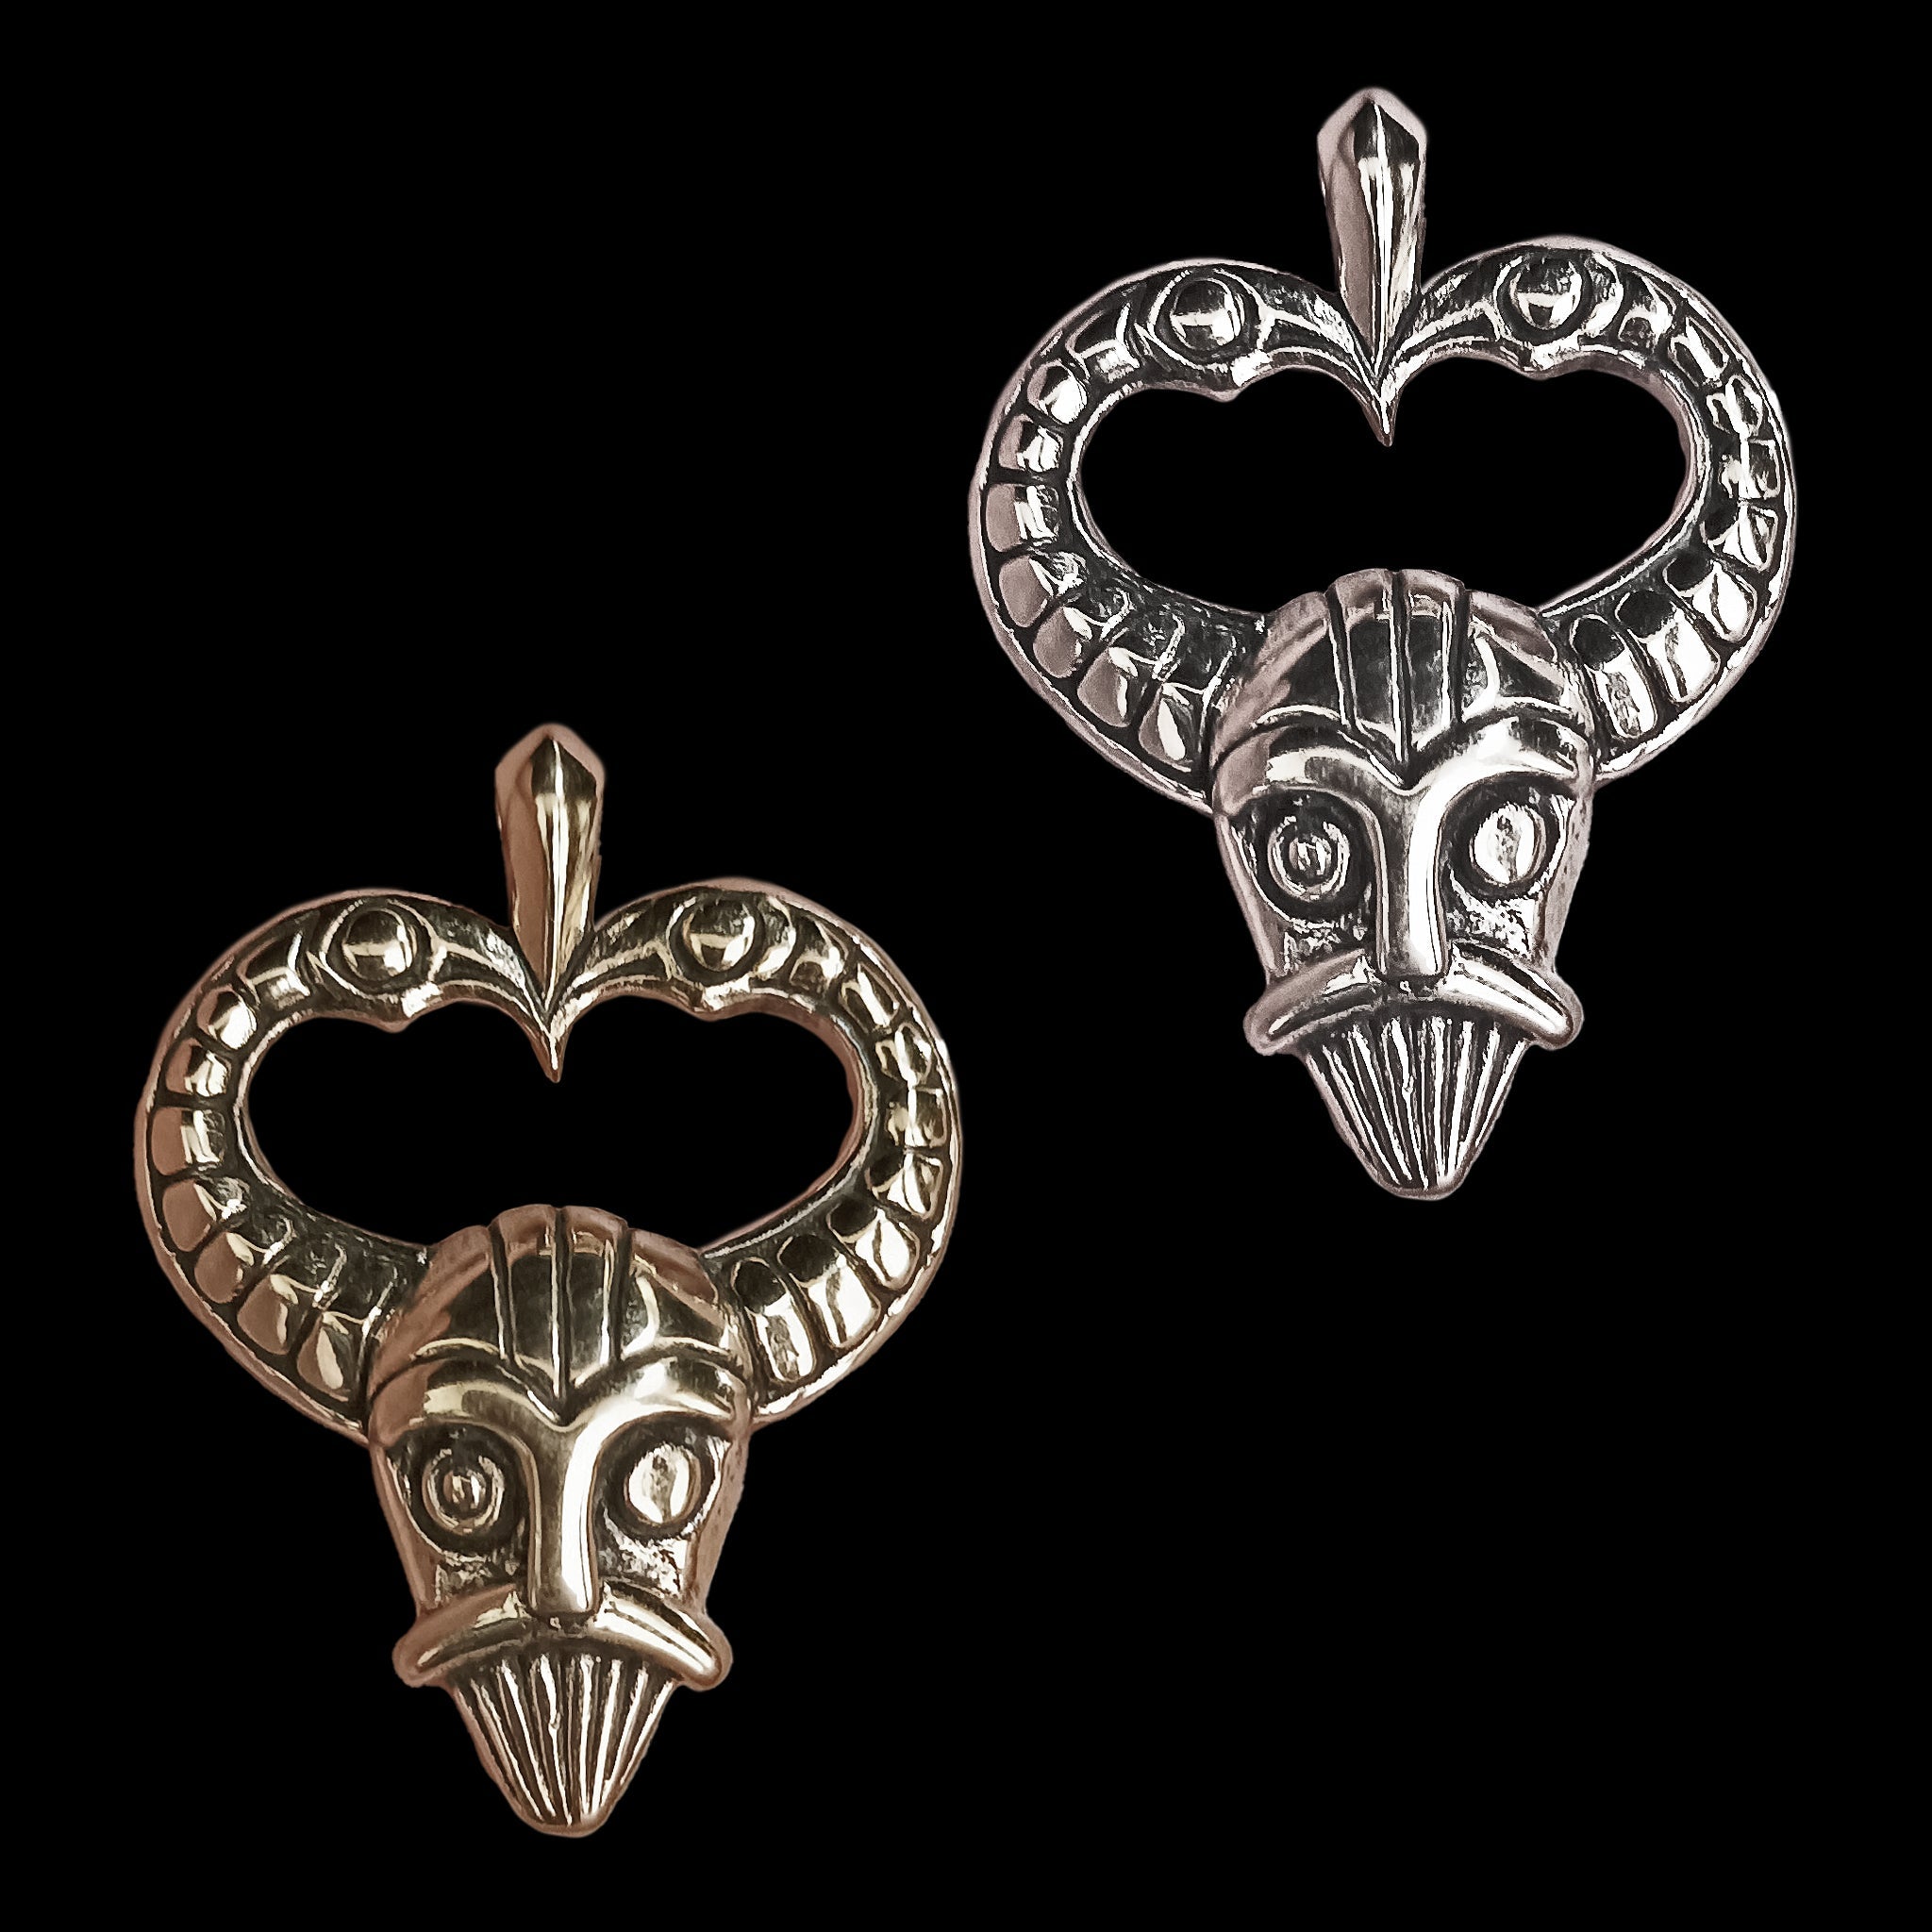 Odin Protection Pendants - Bronze and Silver